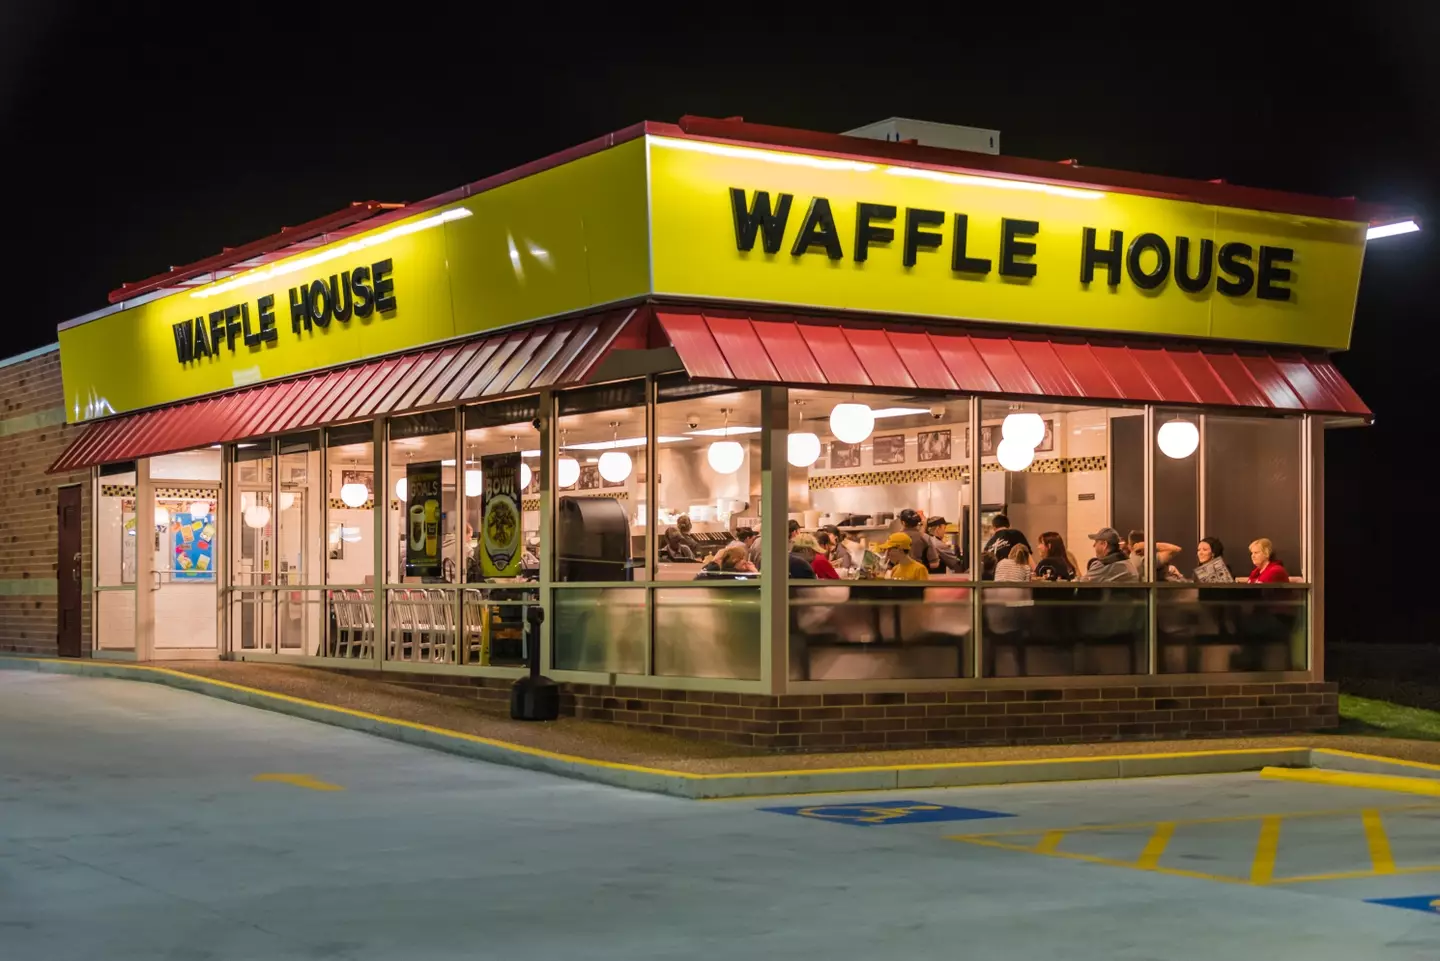 Not to scare you, but Waffle House is closed.